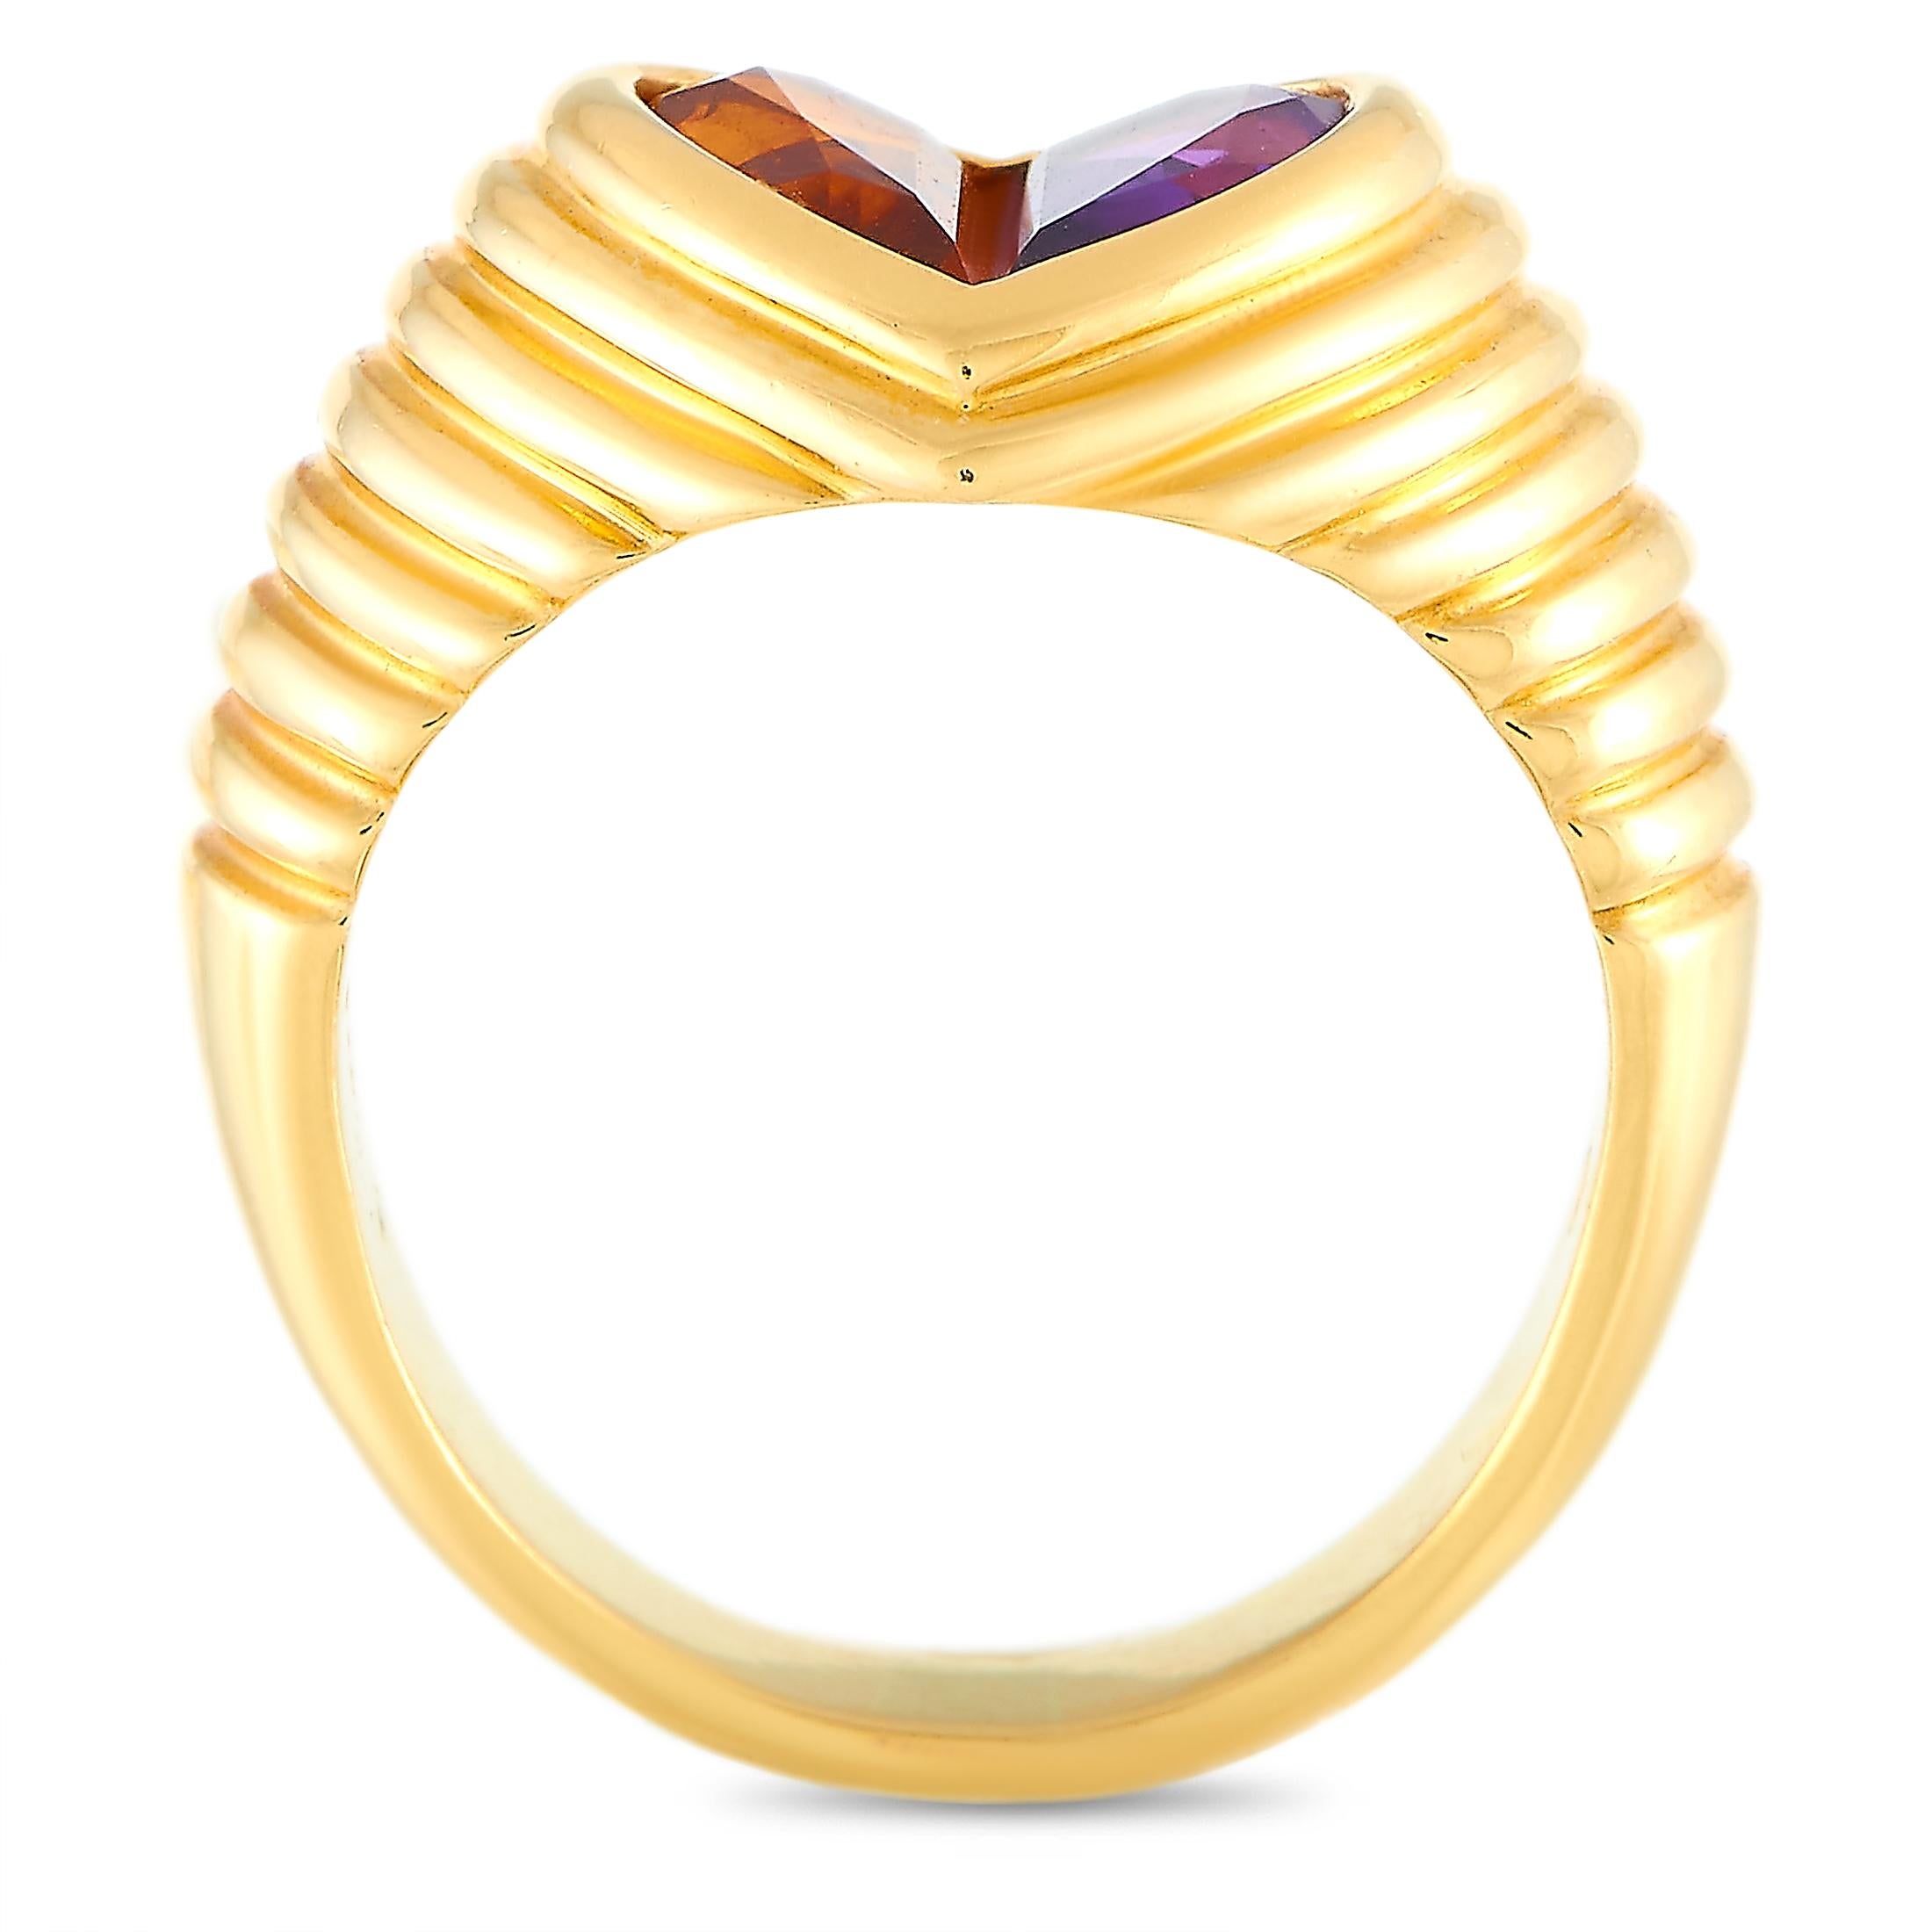 The Bvlgari “Doppio” ring is crafted from 18K yellow gold and set with an amethyst and a citrine. The ring weighs 11.4 grams and boasts band thickness of 6 mm and top height of 5 mm, while top dimensions measure 21 by 12 mm.
 
 This item is